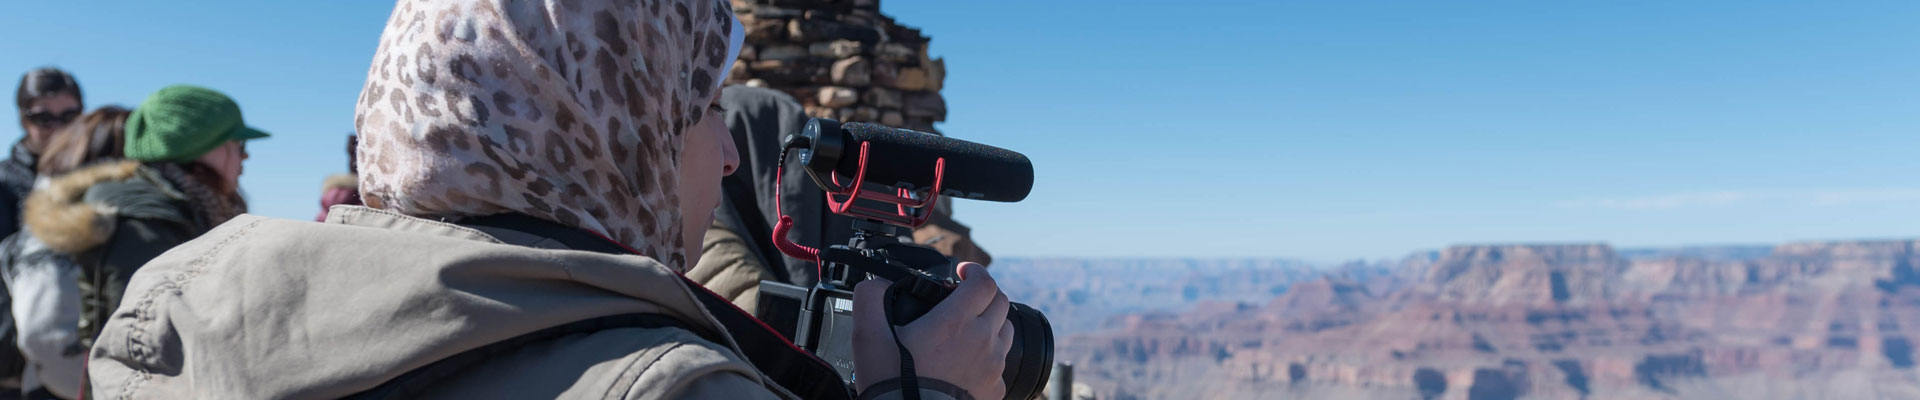 Student photographing the Grand Canyon.